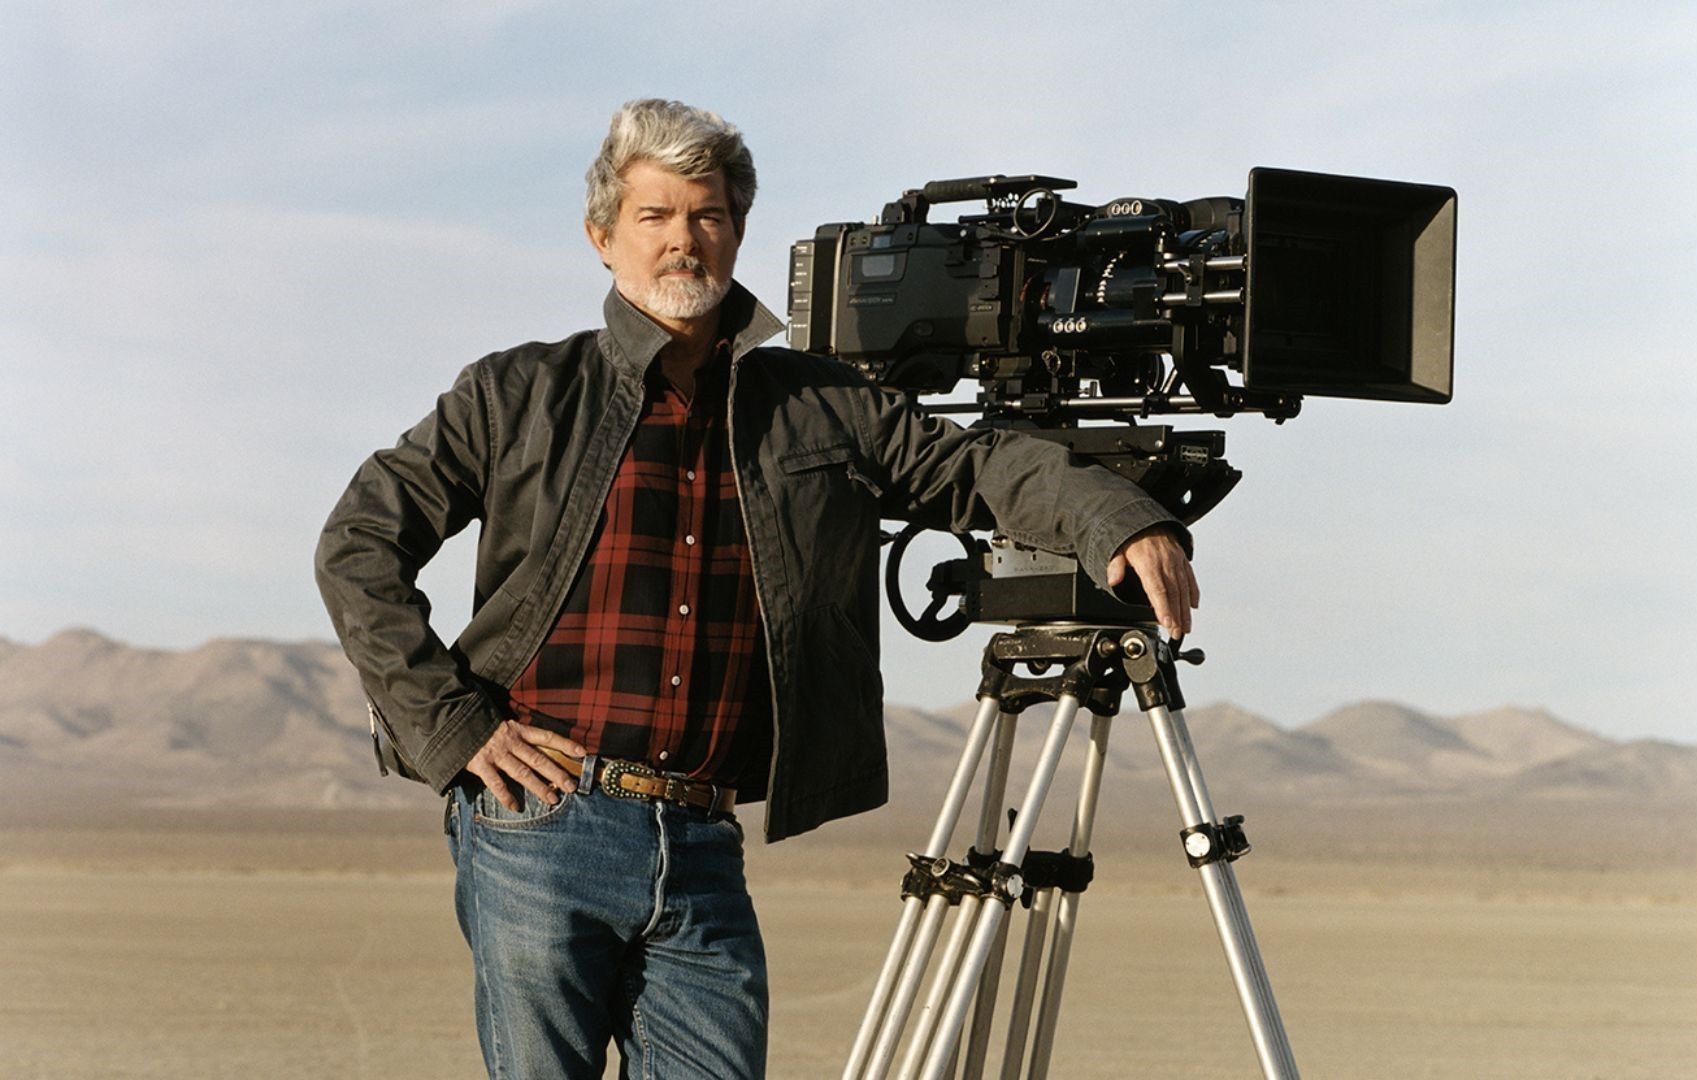 George Lucas on 'Star Wars' critics, diversity, and sneaking into Cannes